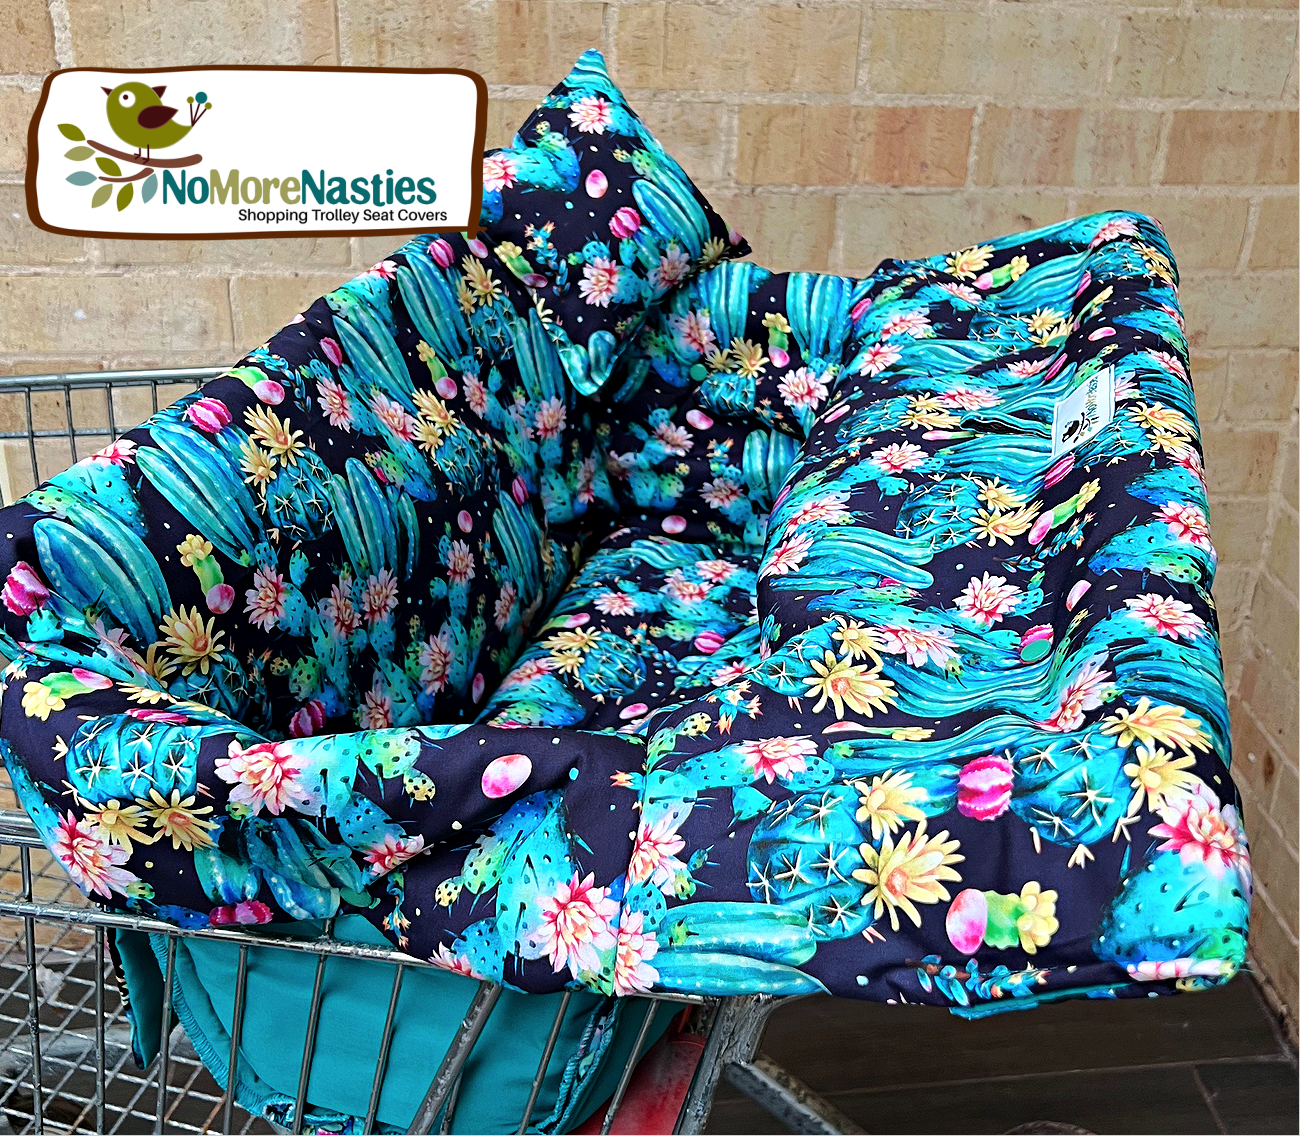 Cactus Deluxe Shopping Trolley Seat Cover